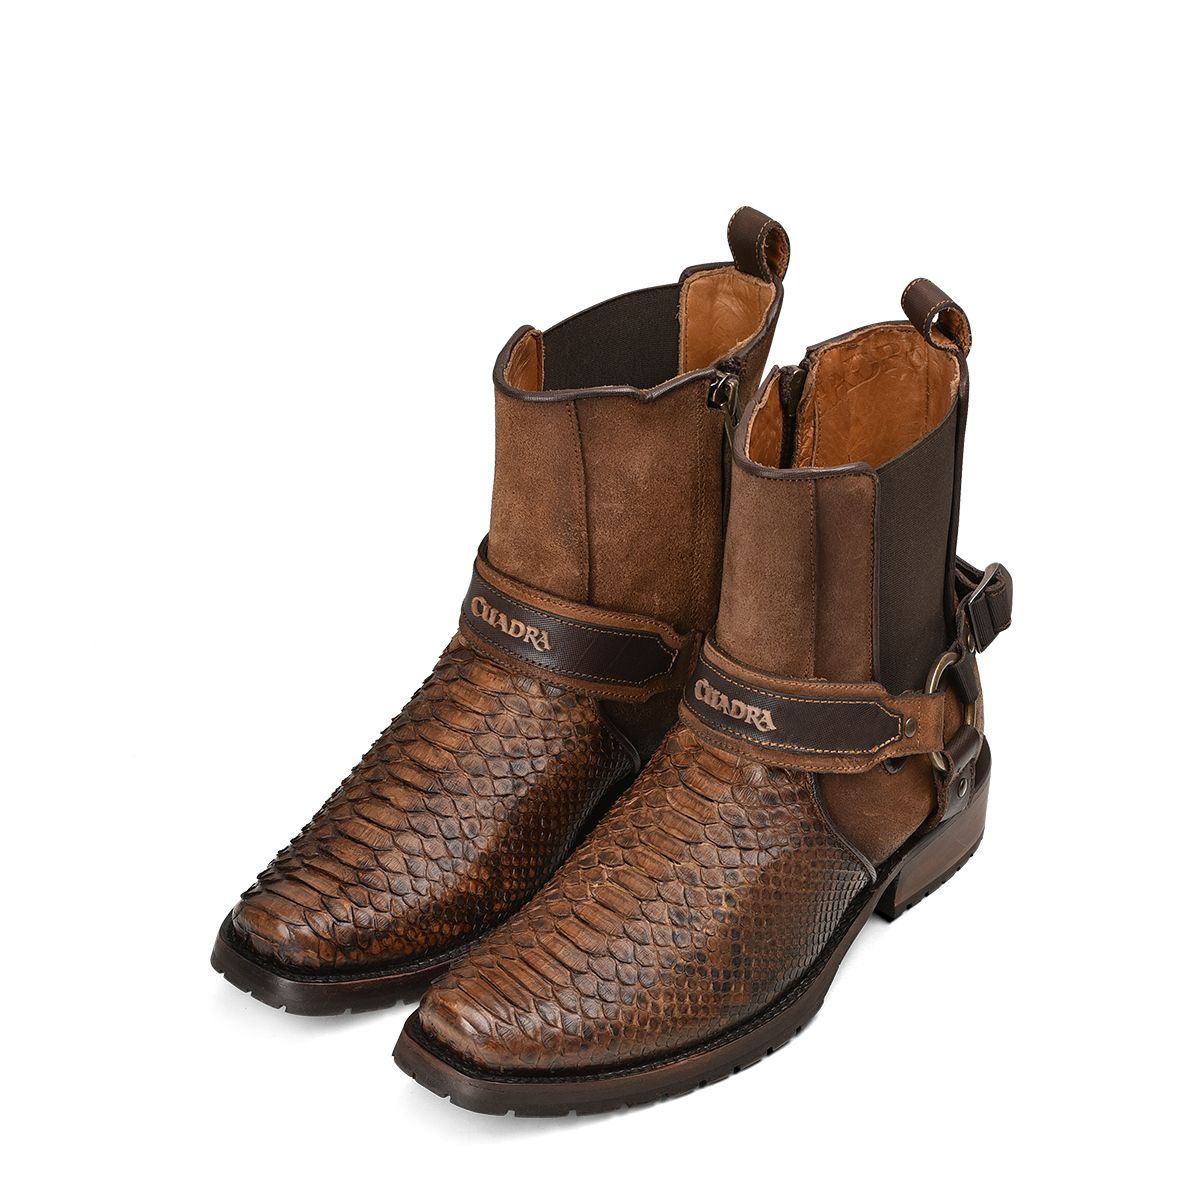 1J2LPH - Cuadra brown casual cowboy python skin zip ankle boots for men-Kuet.us